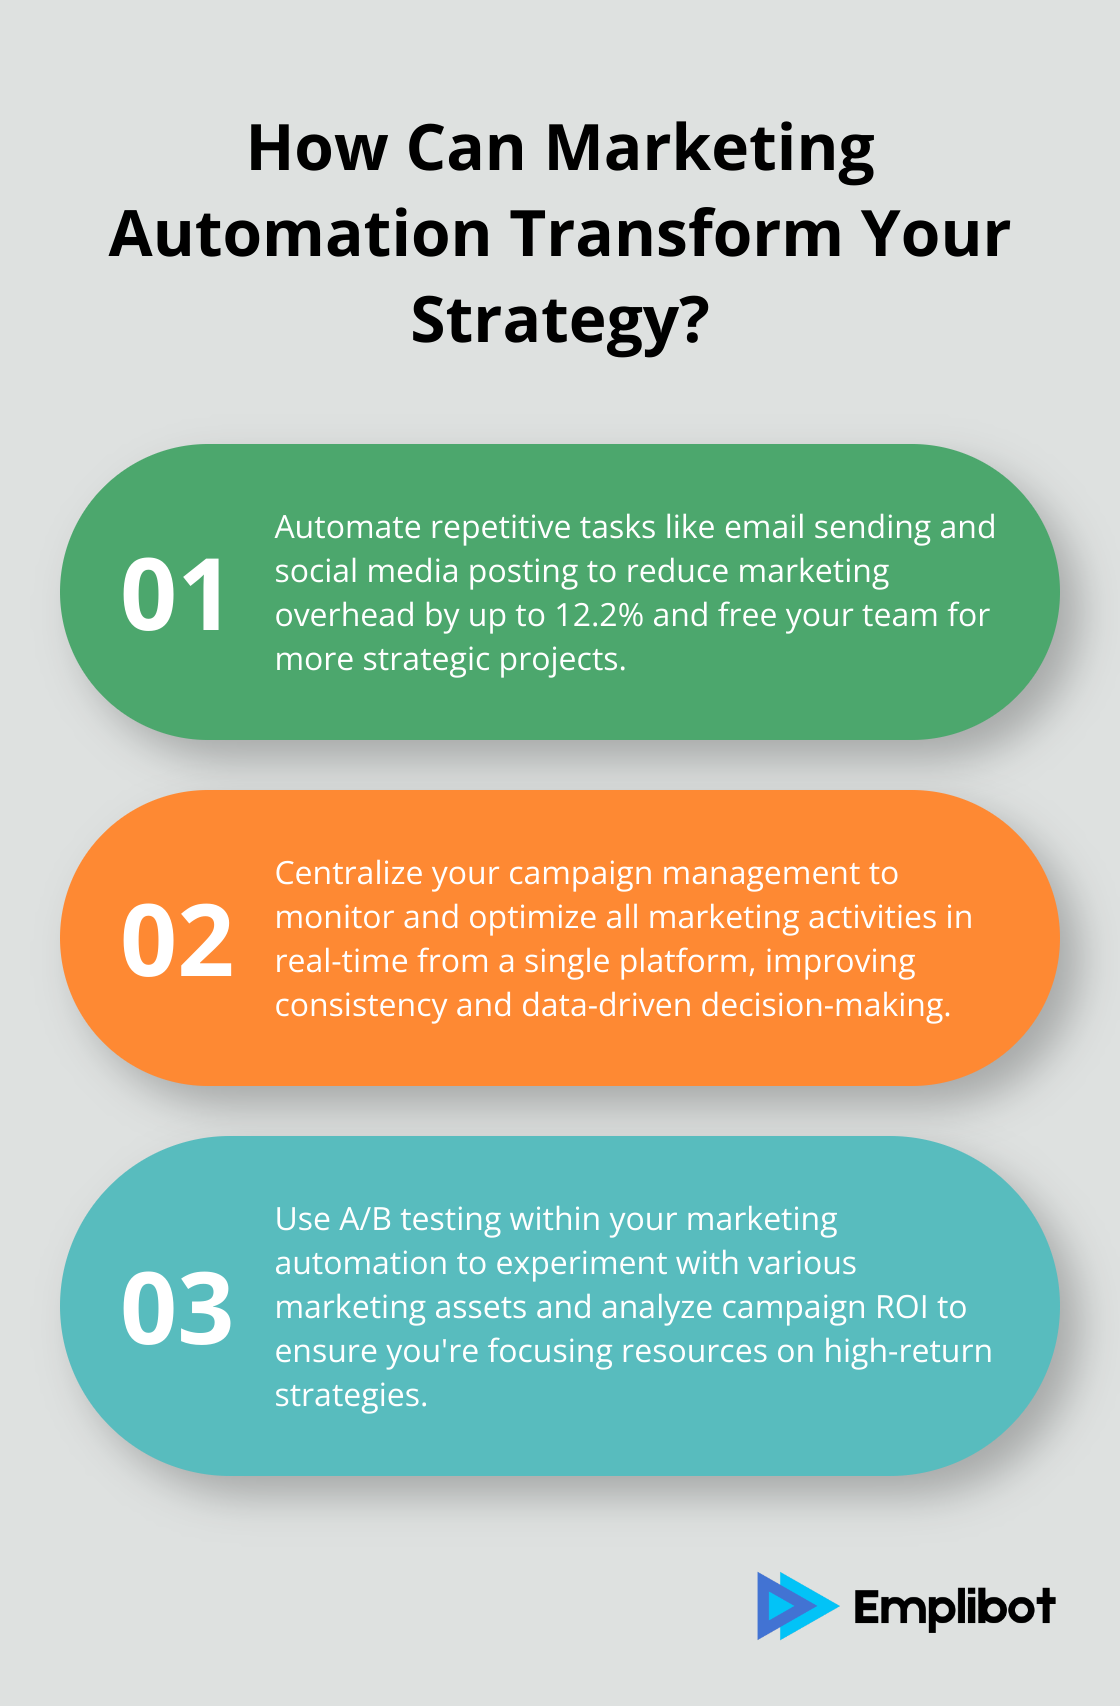 Fact - How Can Marketing Automation Transform Your Strategy?